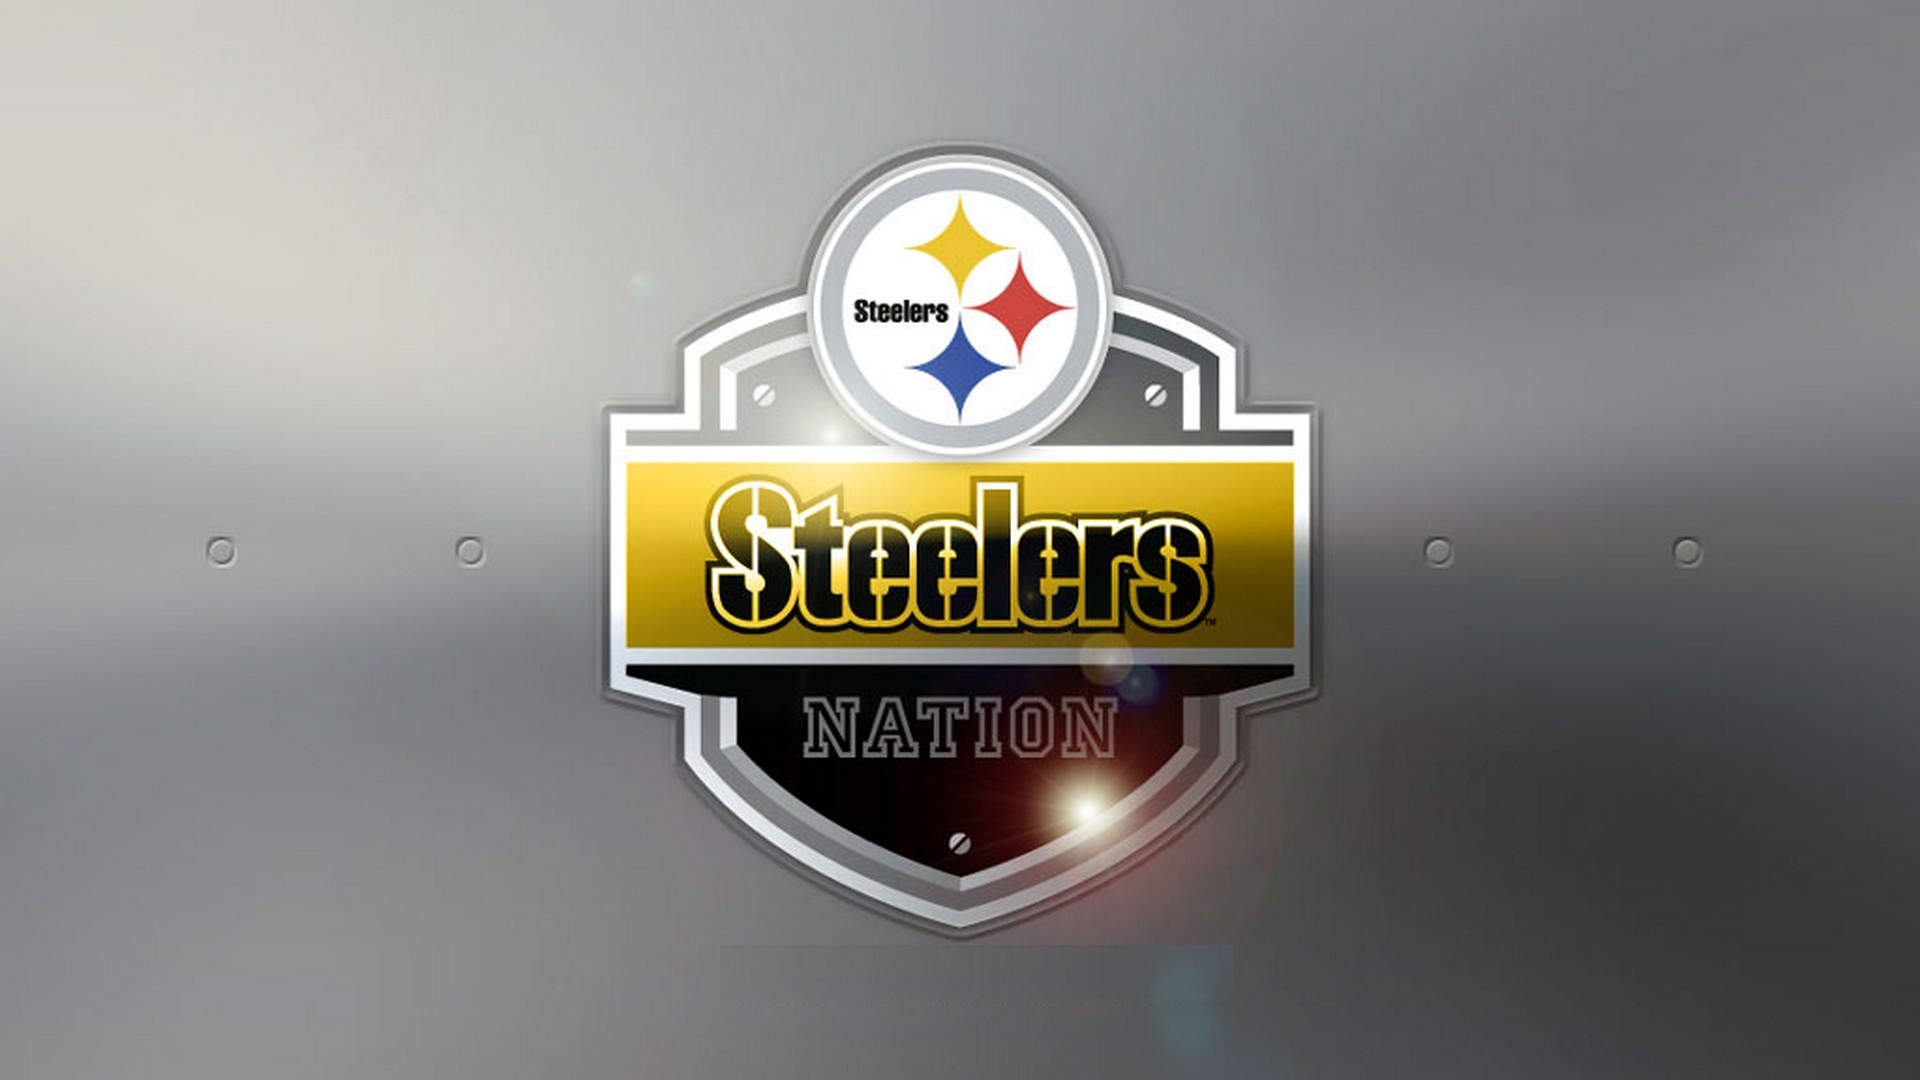 HD Steelers Backgrounds With Resolution 1920X1080 pixel. You can make this wallpaper for your Mac or Windows Desktop Background, iPhone, Android or Tablet and another Smartphone device for free